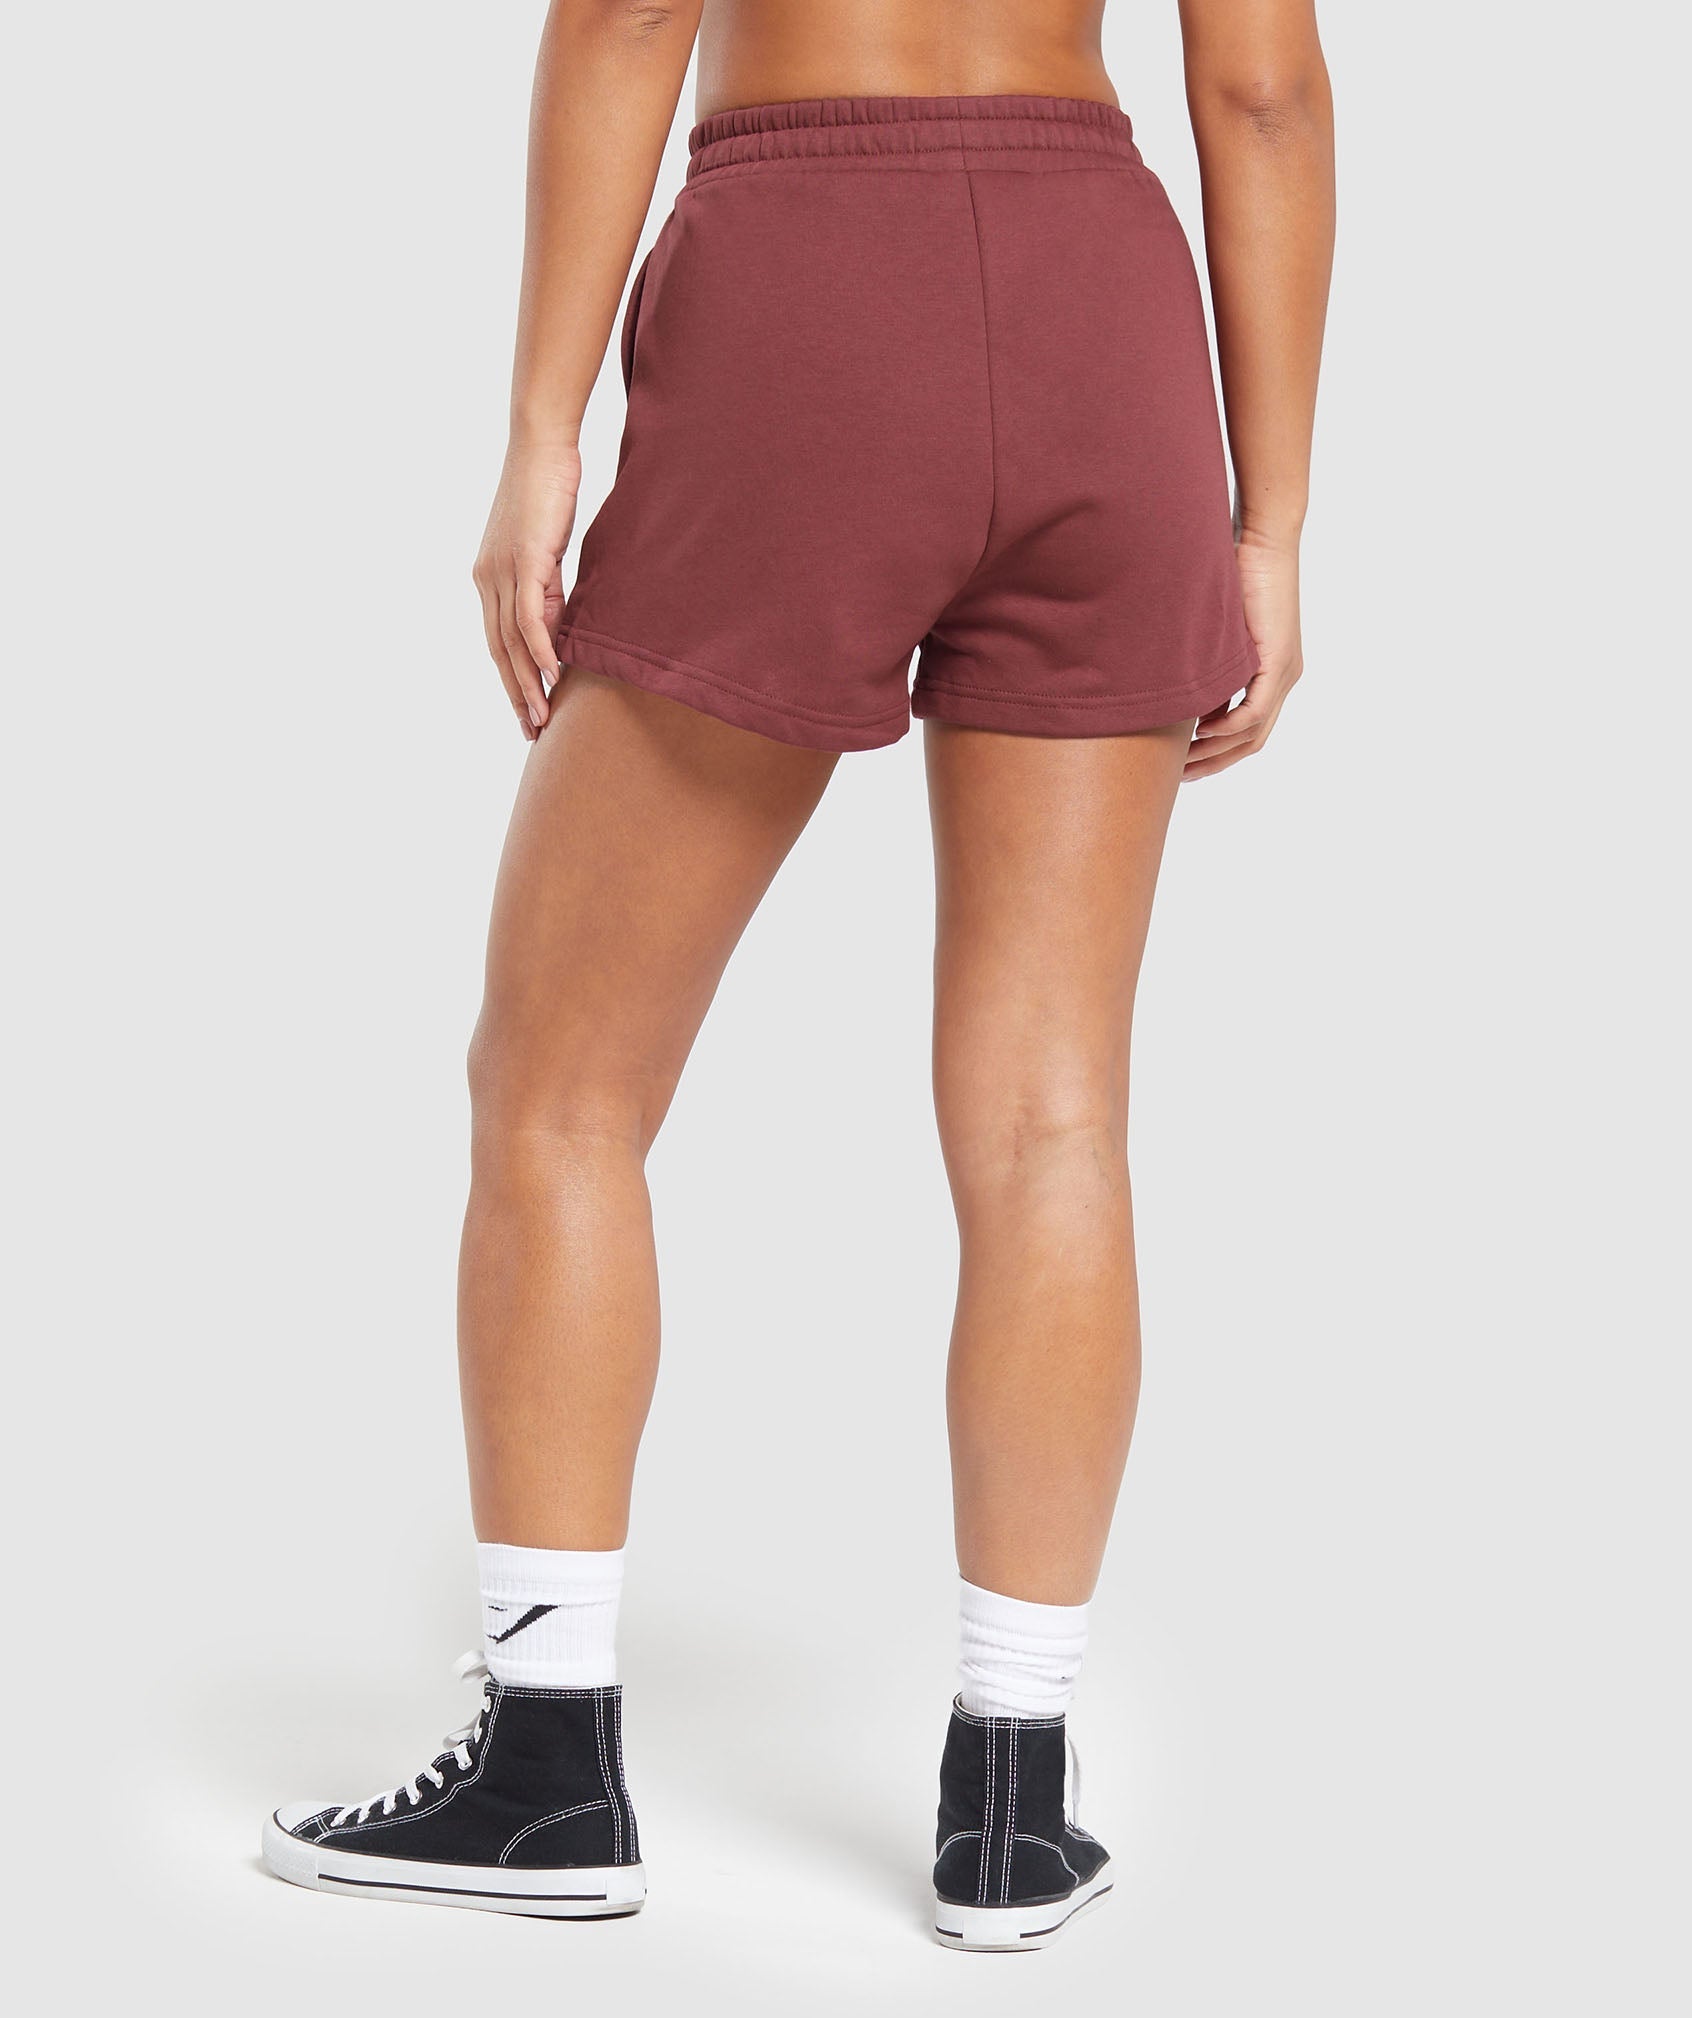 Built Graphic Shorts in Washed Burgundy - view 3